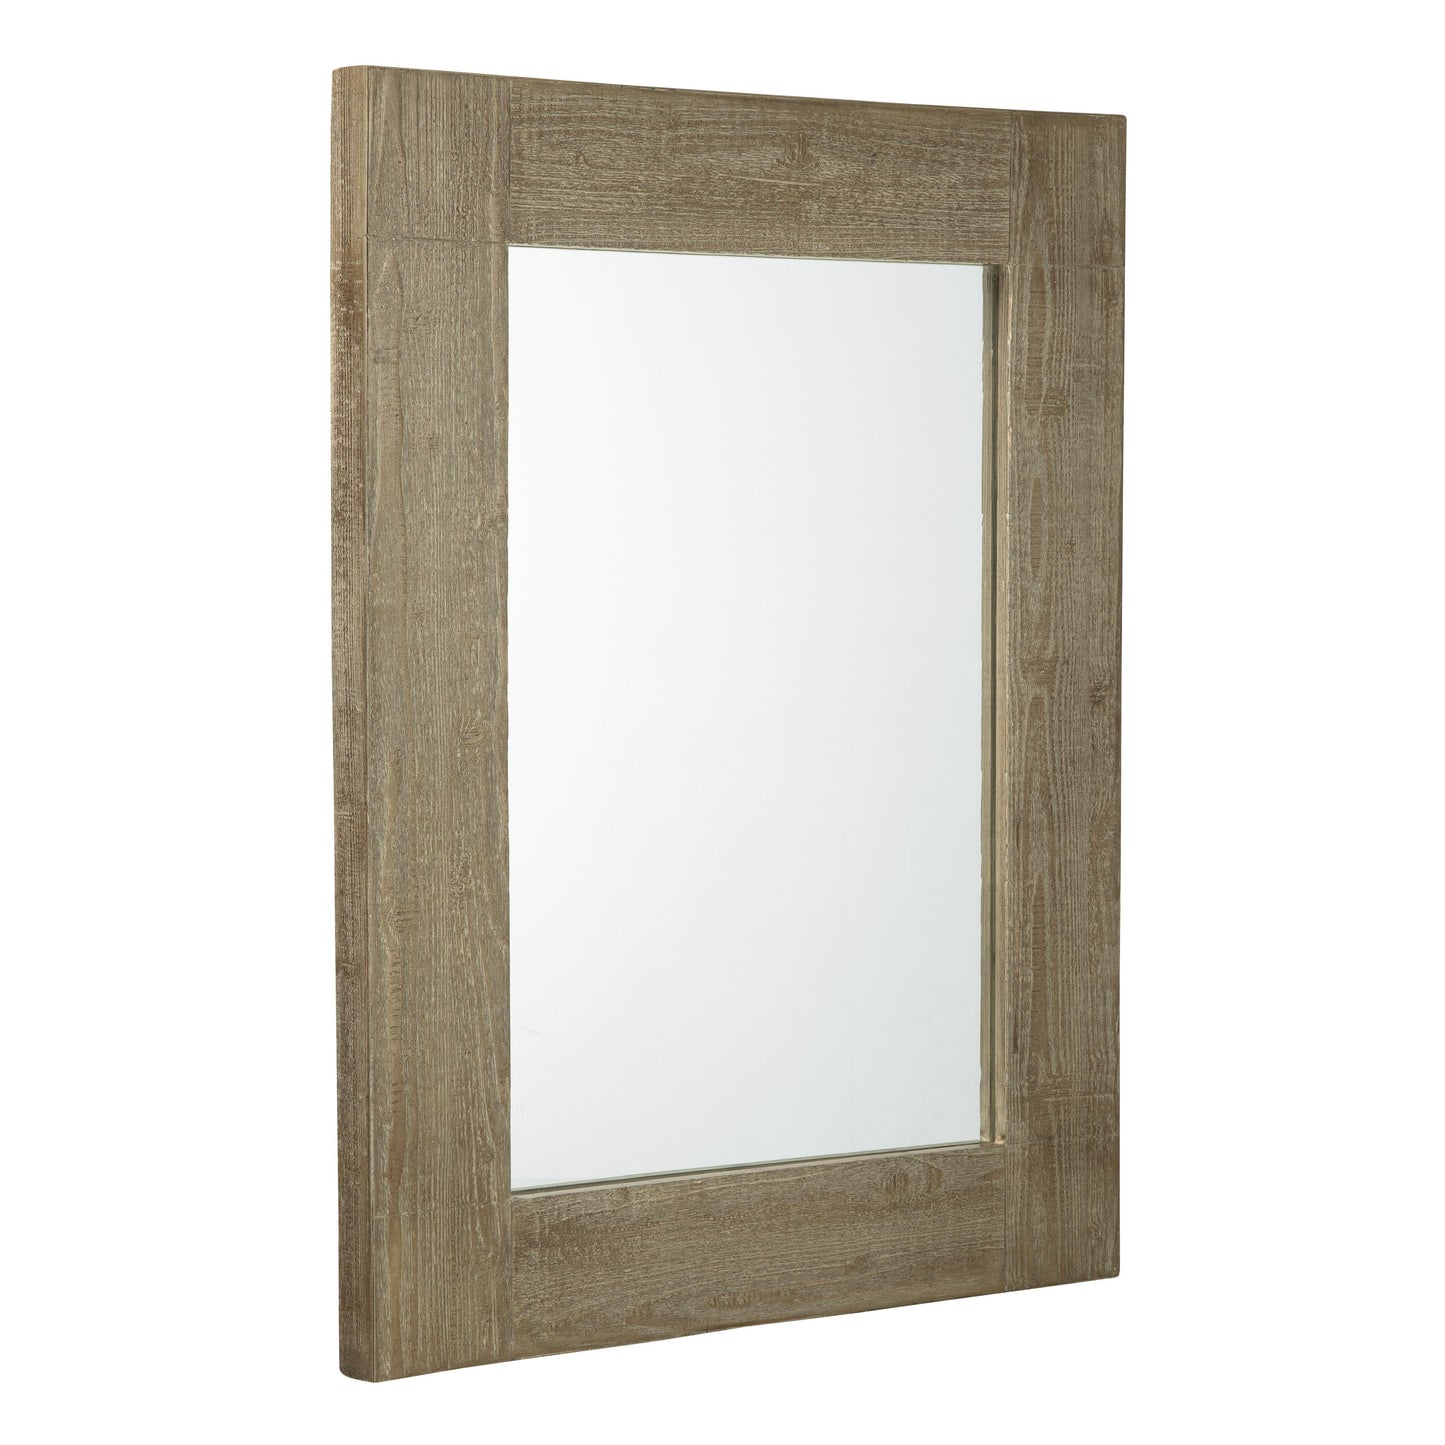 Signature Design by Ashley Waltleigh Wall Mirror A8010277 IMAGE 1